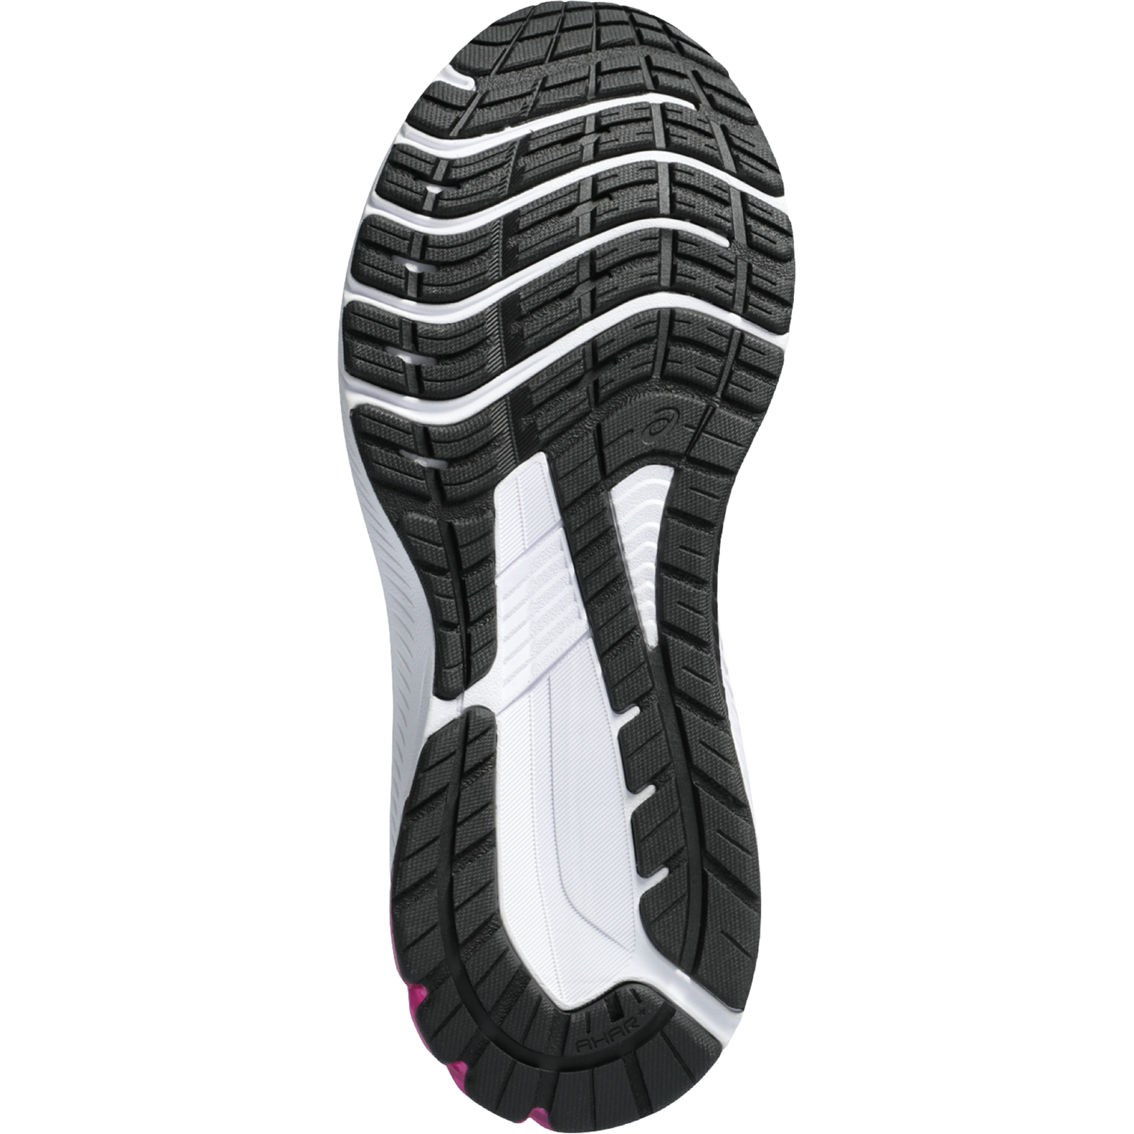 ASICS Women's GT-1000 12 Running Shoes - Image 4 of 5